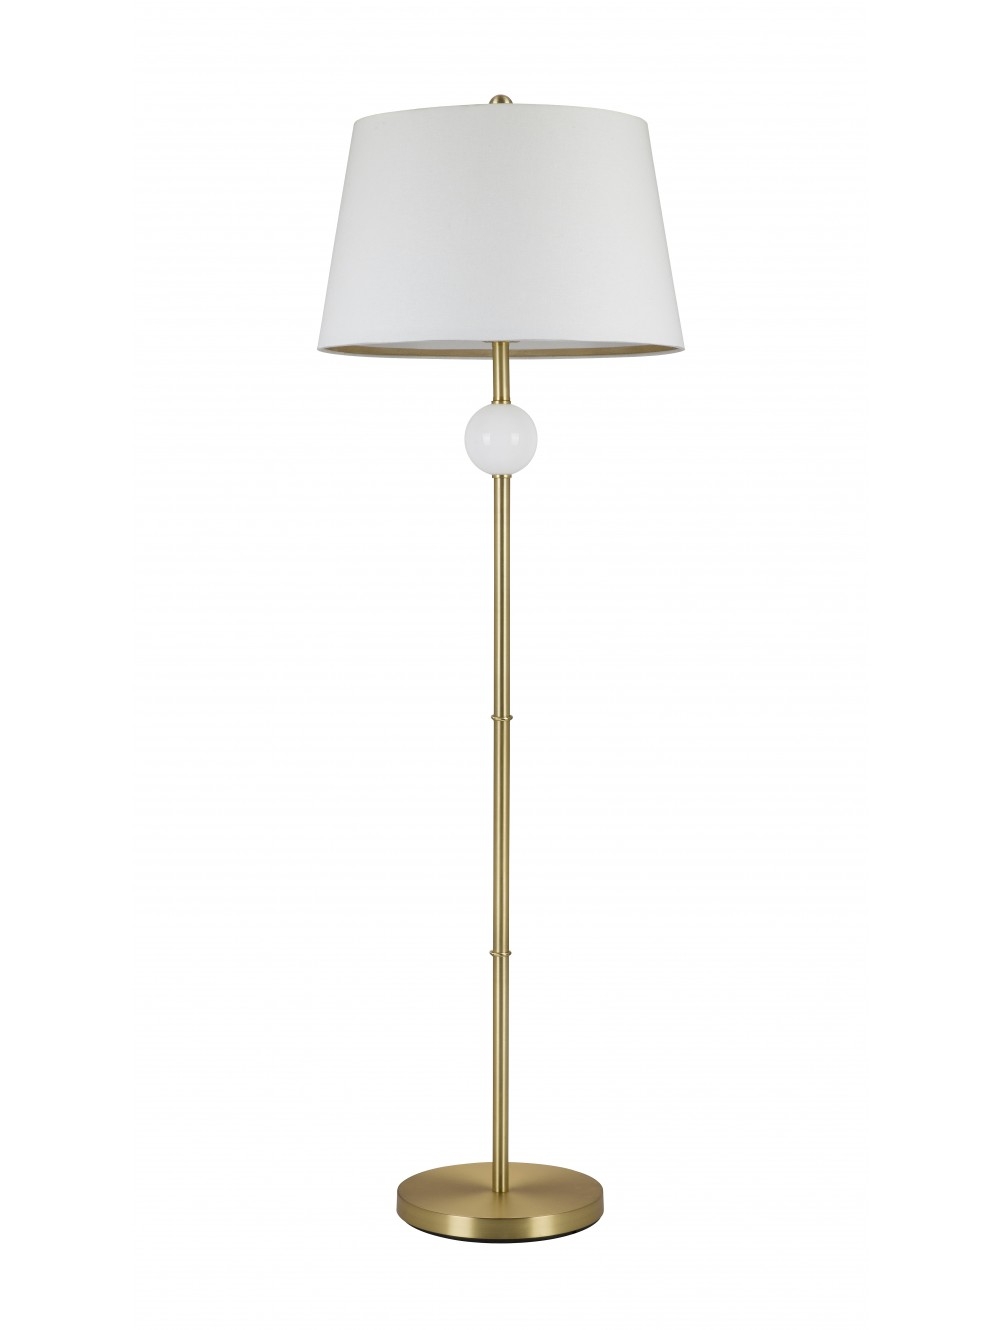 CUPCAKES AND CASHMERE STACKED BALL FLOOR LAMP - Image 0